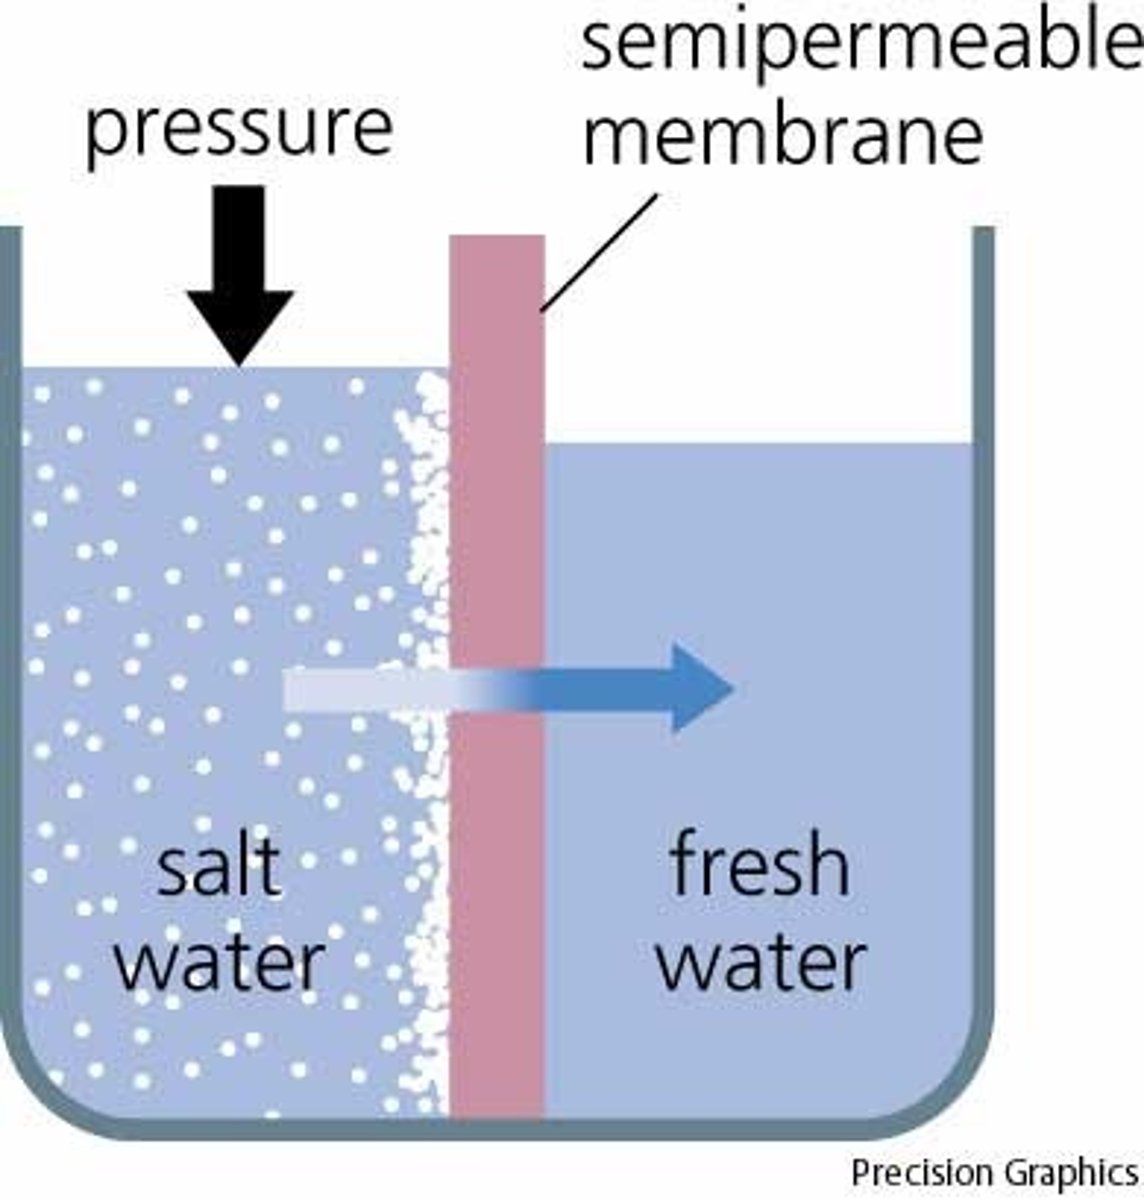 <p>a process by which molecules of a solvent tend to pass through a semipermeable membrane from a less concentrated solution into a more concentrated one, thus equalizing the concentrations on each side of the membrane.</p>